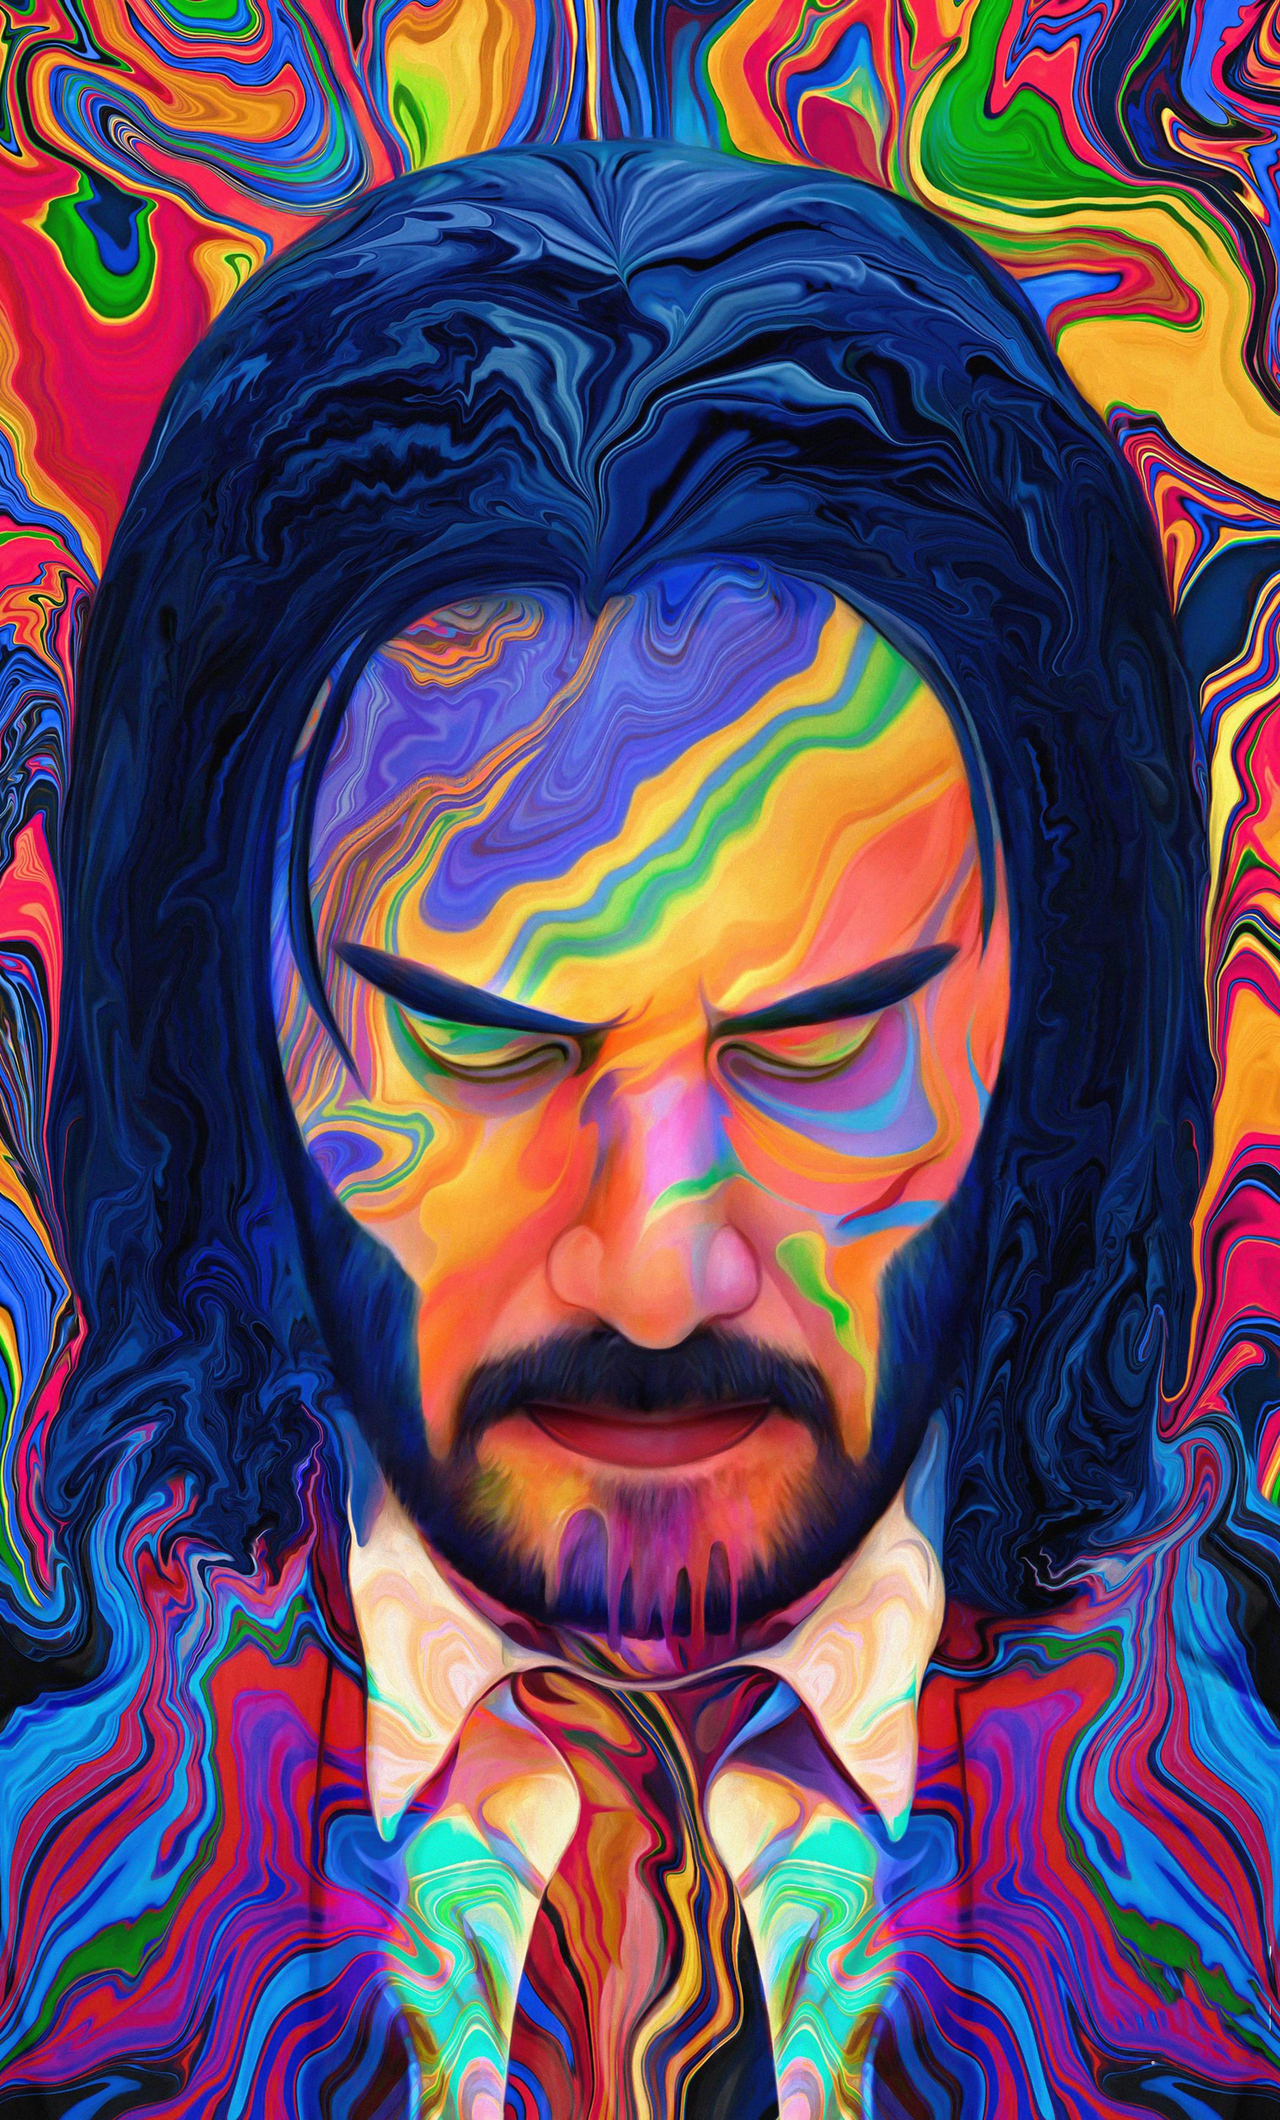 John Wick 3 Wallpaper / John Wick Chapter 3 Parabellum Keanu Reeves 4K Wallpapers ... - That can be made your desktop wallpaper by right clicking the wallpaper and select set as desktop background.